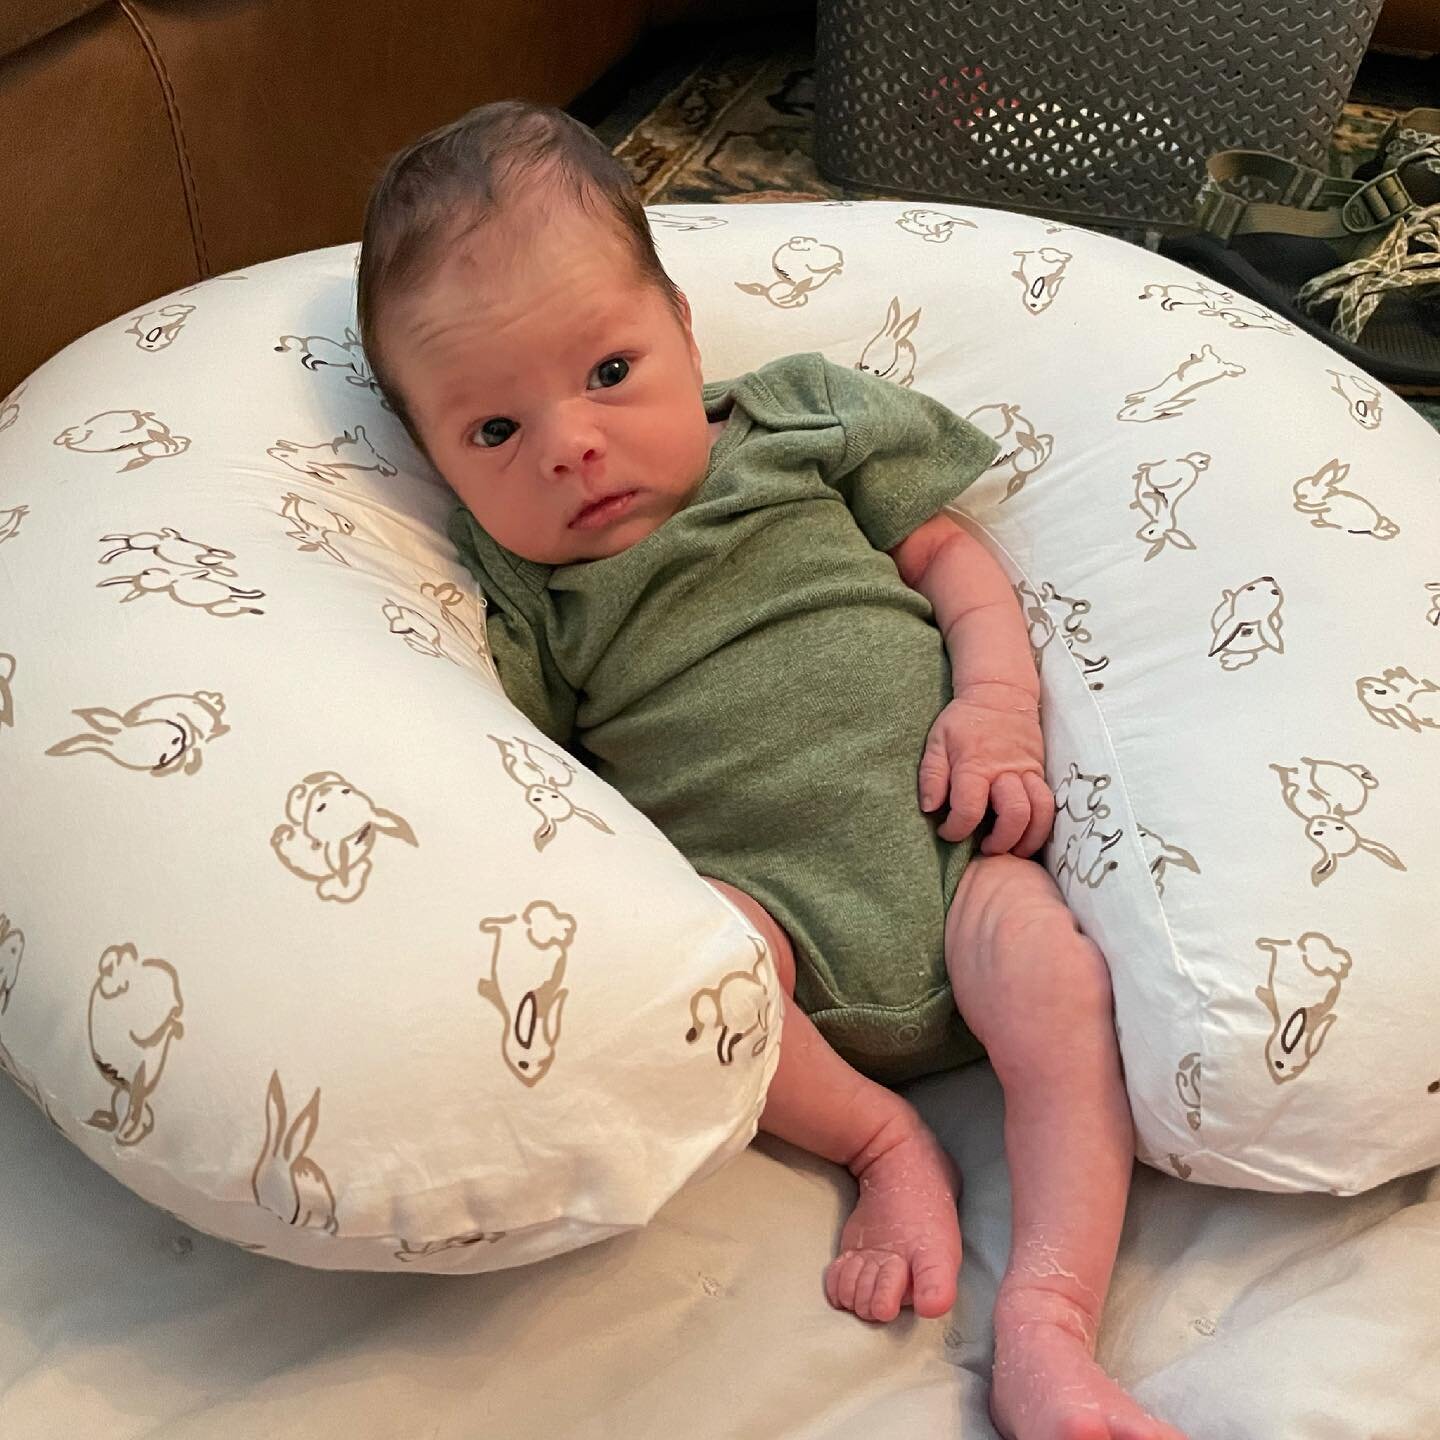 This my boy James! We eat, sleep, and poop, and hiccup! Every day he seems to grow more alert and at this point I think he&rsquo;s ready for a camping trip! 🤣😂 thank you to all our friends and family for the support, meal train, and prayers. We are